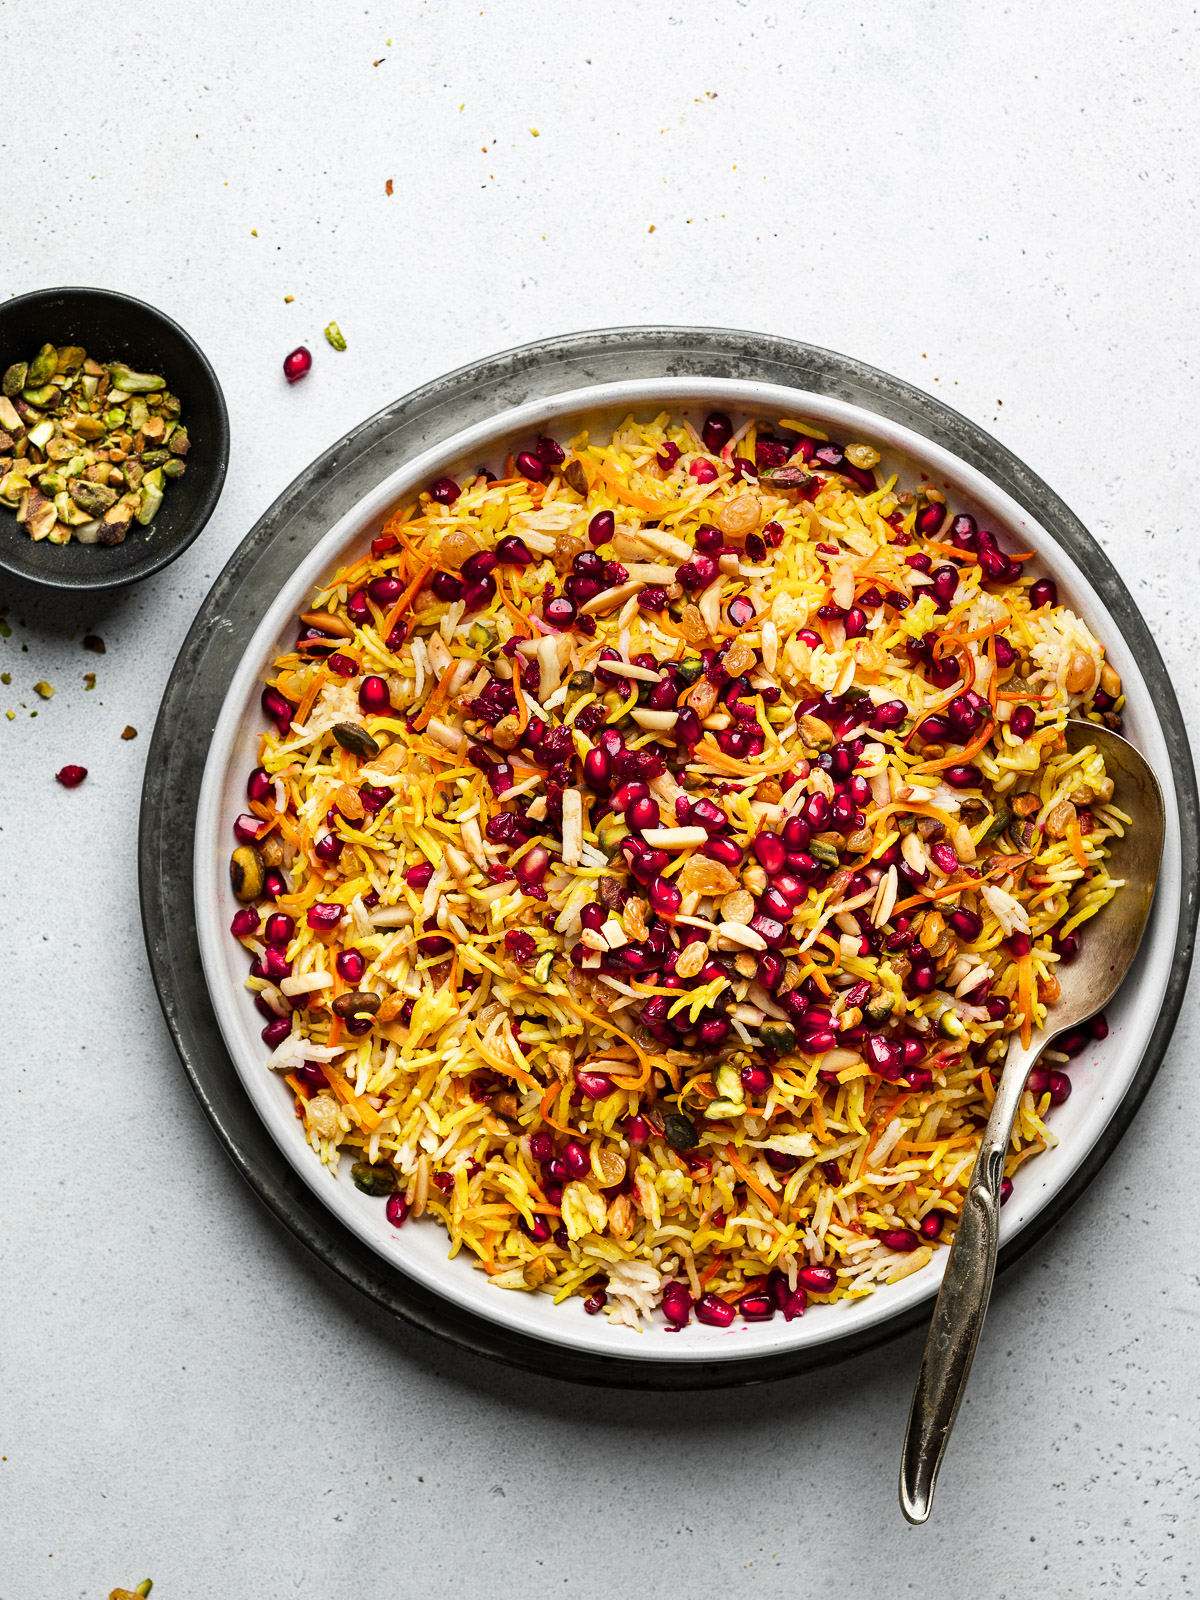 Persian style jewel rice served on platter with pistachio bowl on the side